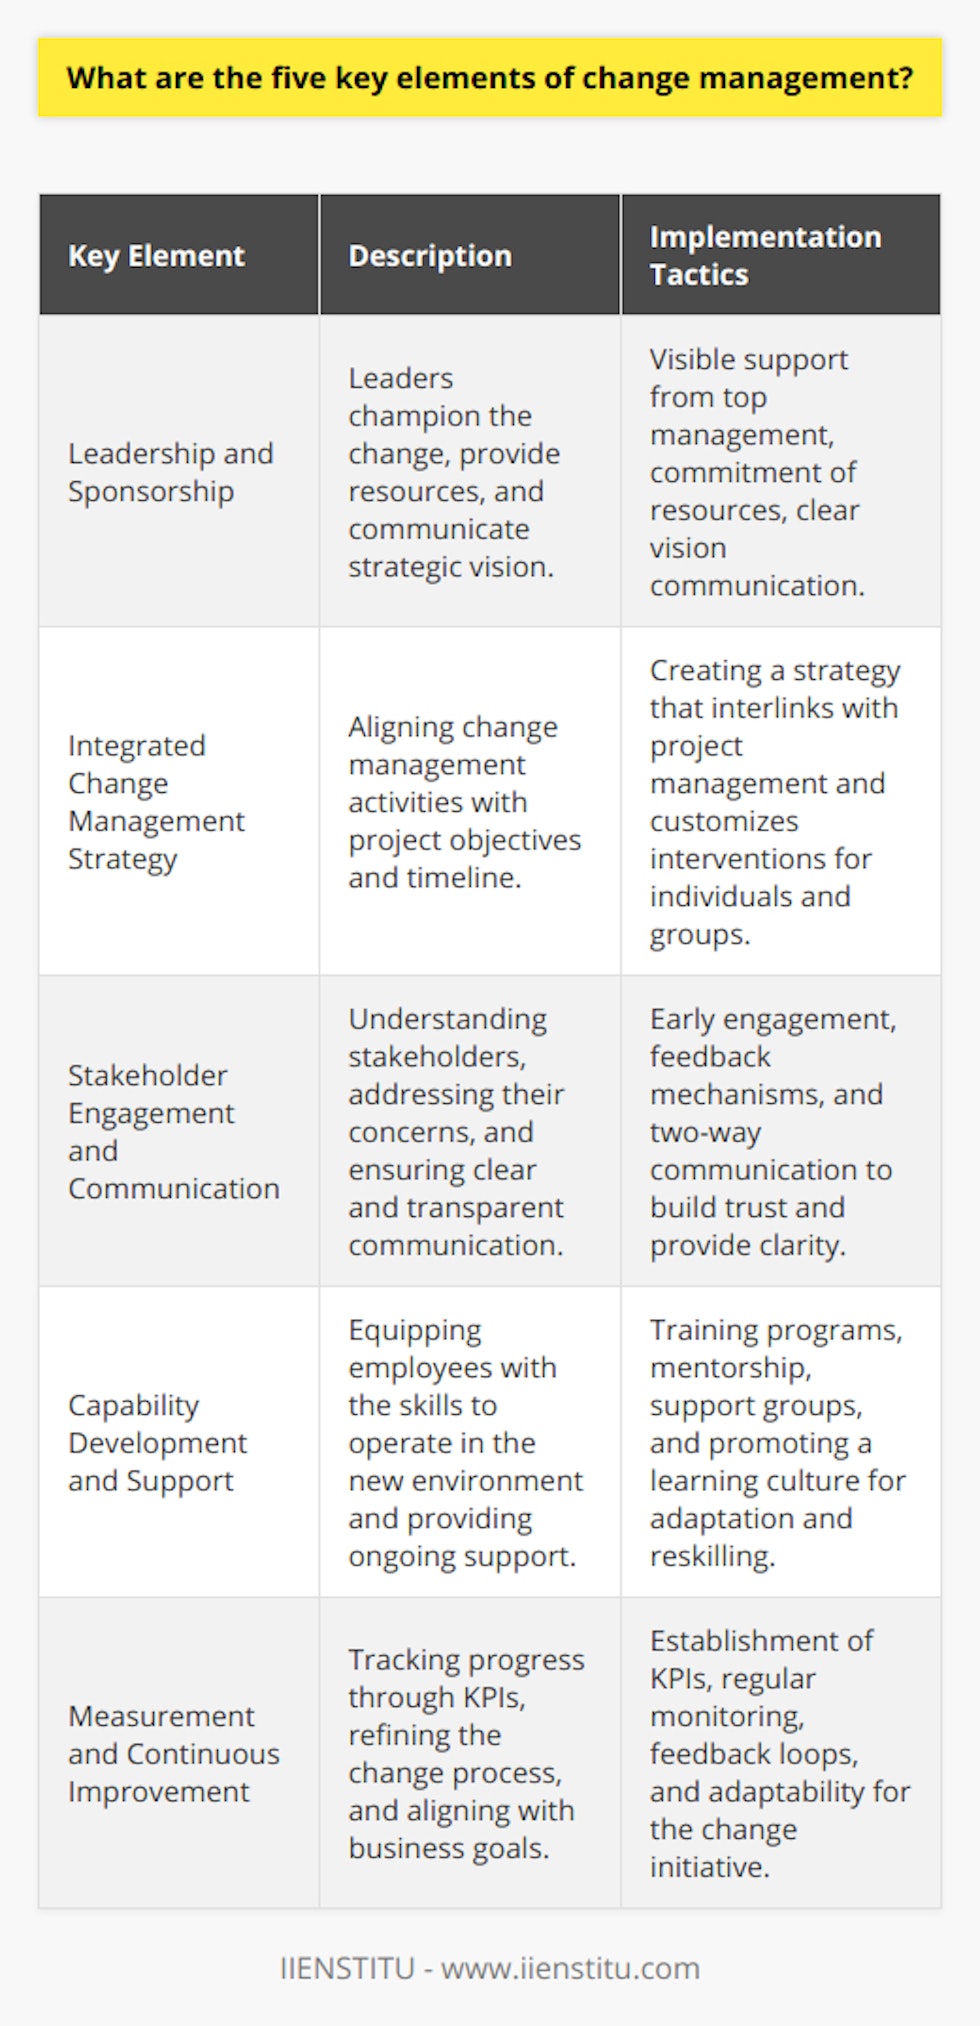 Change management is a crucial discipline within organizations that deals with the methodologies and mechanisms for dealing with the people side of change. A consistent and holistic approach to dealing with change is essential for organizations to thrive. Here are five key elements that are fundamental to effective change management:**Leadership and Sponsorship**Leadership is the backbone of change management. Effective change management requires active and visible sponsorship from the highest levels within an organization. Leaders must champion the change, commit the necessary resources, and communicate the strategic vision. With their ability to influence and guide, leaders set the tone and pace of change, creating an environment where it can be embraced and effectively implemented.**Integrated Change Management Strategy**Having an integrated strategy is essential. This means aligning the change management activities with the project's objectives and timeline. An integrated strategy ensures that change management is not an afterthought or a parallel process but rather interwoven with project management and part of the organization's DNA. Effective strategies will consider the specific impact of change on individuals and groups, tailoring interventions to address resistance and promote adoption.**Stakeholder Engagement and Communication**Identifying and understanding stakeholders is key in change management. Engaging with them early and often ensures that their concerns and feedback are heard and addressed. Transparent and targeted communication keeps stakeholders informed, addresses uncertainties, and provides clarity on the benefits of change.Continuous, two-way communication is not only about sharing information but also about building trust and providing an avenue for employees to express concerns and feel heard. This iterative process can mitigate resistance and foster a more inclusive atmosphere for change.**Capability Development and Support**An organization must equip its employees with the necessary skills and knowledge to operate efficiently in the new environment. Capability development goes beyond imparting training, it is also about ensuring ongoing support is available to address challenges as they arise, and about creating a learning culture that encourages adaptation.Reskilling and upskilling of employees and providing regular support through mentors, coaches, or support groups are all tactics that facilitate the transition to new ways of working and help embed the changes into the organization's fabric.**Measurement and Continuous Improvement**Change is not a one-and-done event; it's a continuous process that needs to be tracked and refined. The establishment of Key Performance Indicators (KPIs) aligned with the change objectives allows organizations to measure effectiveness, progress, and impact. Through these indicators, management can identify what's working well, where adjustments are needed, and how change adoption is progressing.Continuous monitoring, feedback loops, and adaptation ensure that the change initiative remains on track, aligned with the business goals, and responsive to any internal or external shifts. It's about embedding an ongoing evaluation mindset that enables perpetual evolution and improvement.Instituting these five key elements of change management ensures a structured and purposeful approach to managing change. Incorporating the concepts into the organizational process helps in minimizing resistance and increases the likelihood of achieving the desired outcomes, ensuring that changes are not only implemented but also sustained over time.